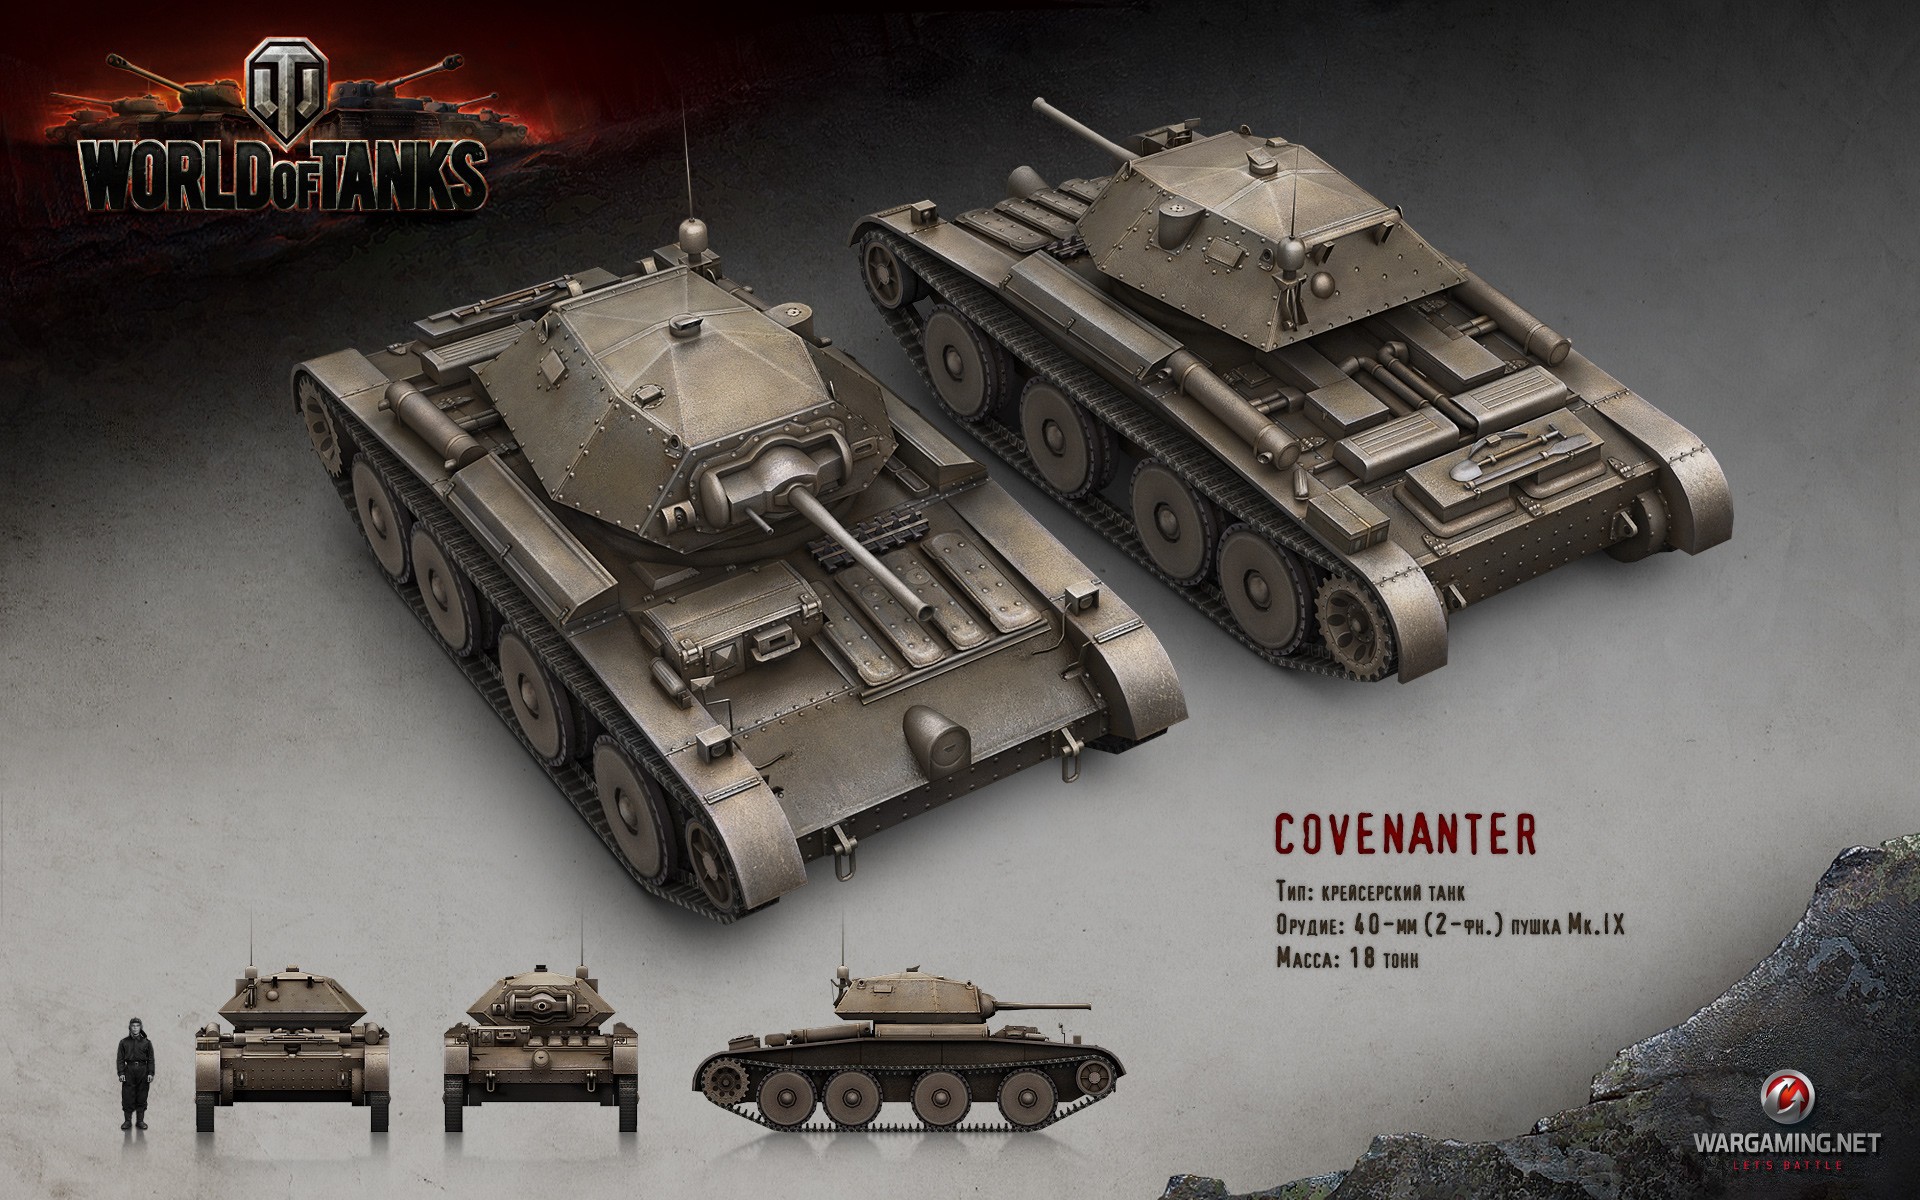 Cruising Covenanter Tank The Game World Of Tanks Wallpaper And